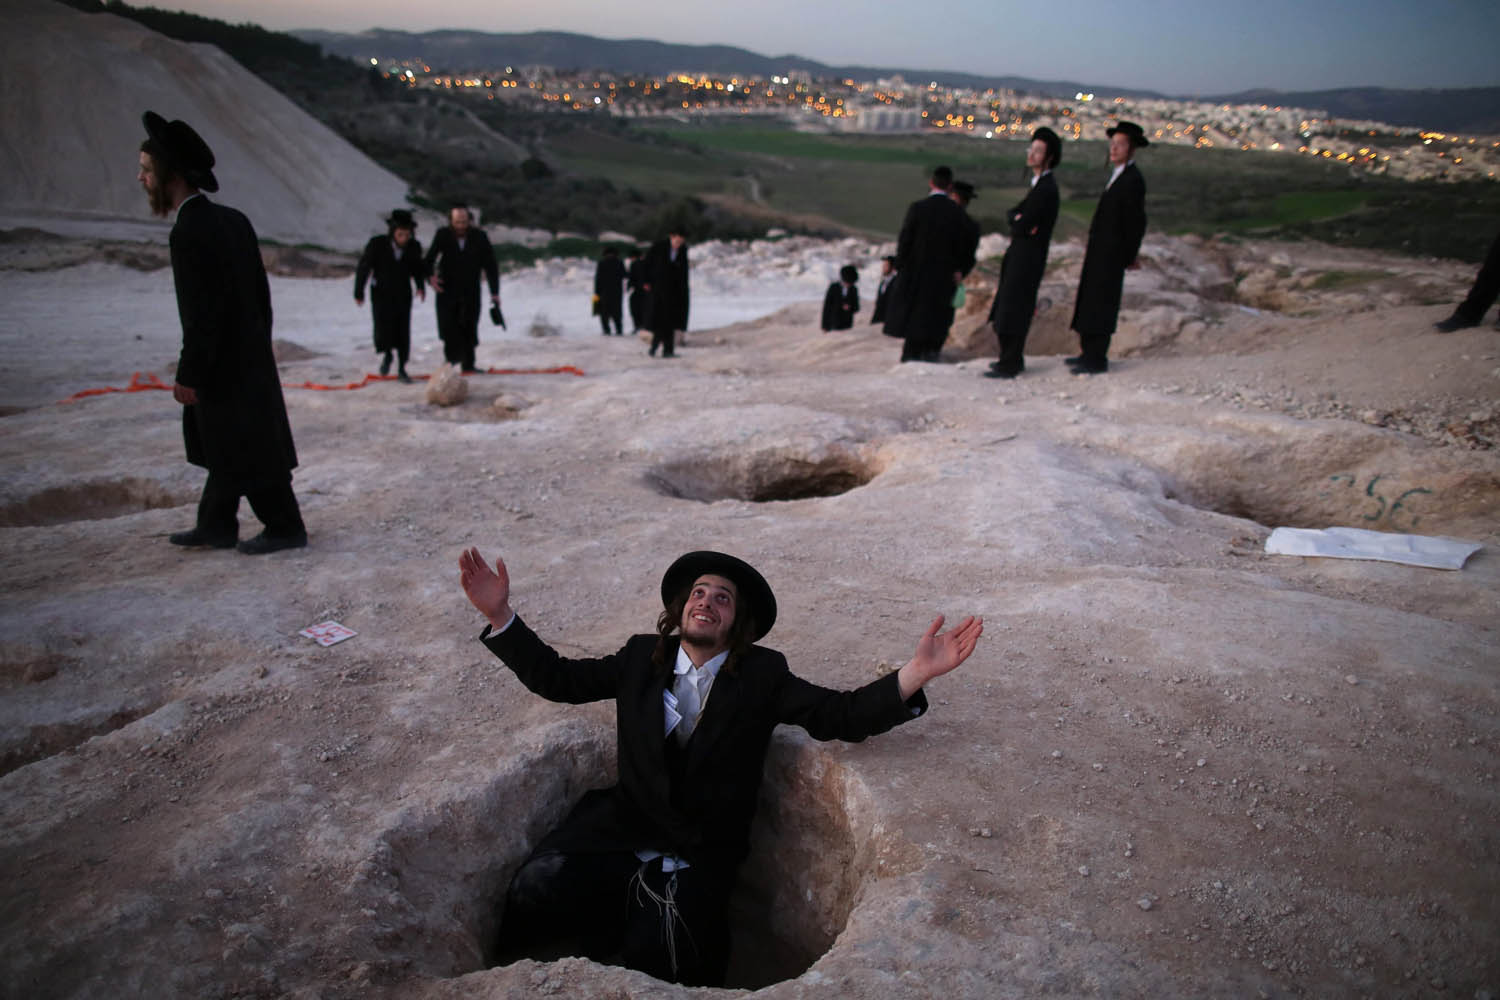 Feb. 12, 2014. An Ultra-Orthodox Jewish man sits in a hole and prays during a demonstration in Beit Shemesh, Israel.